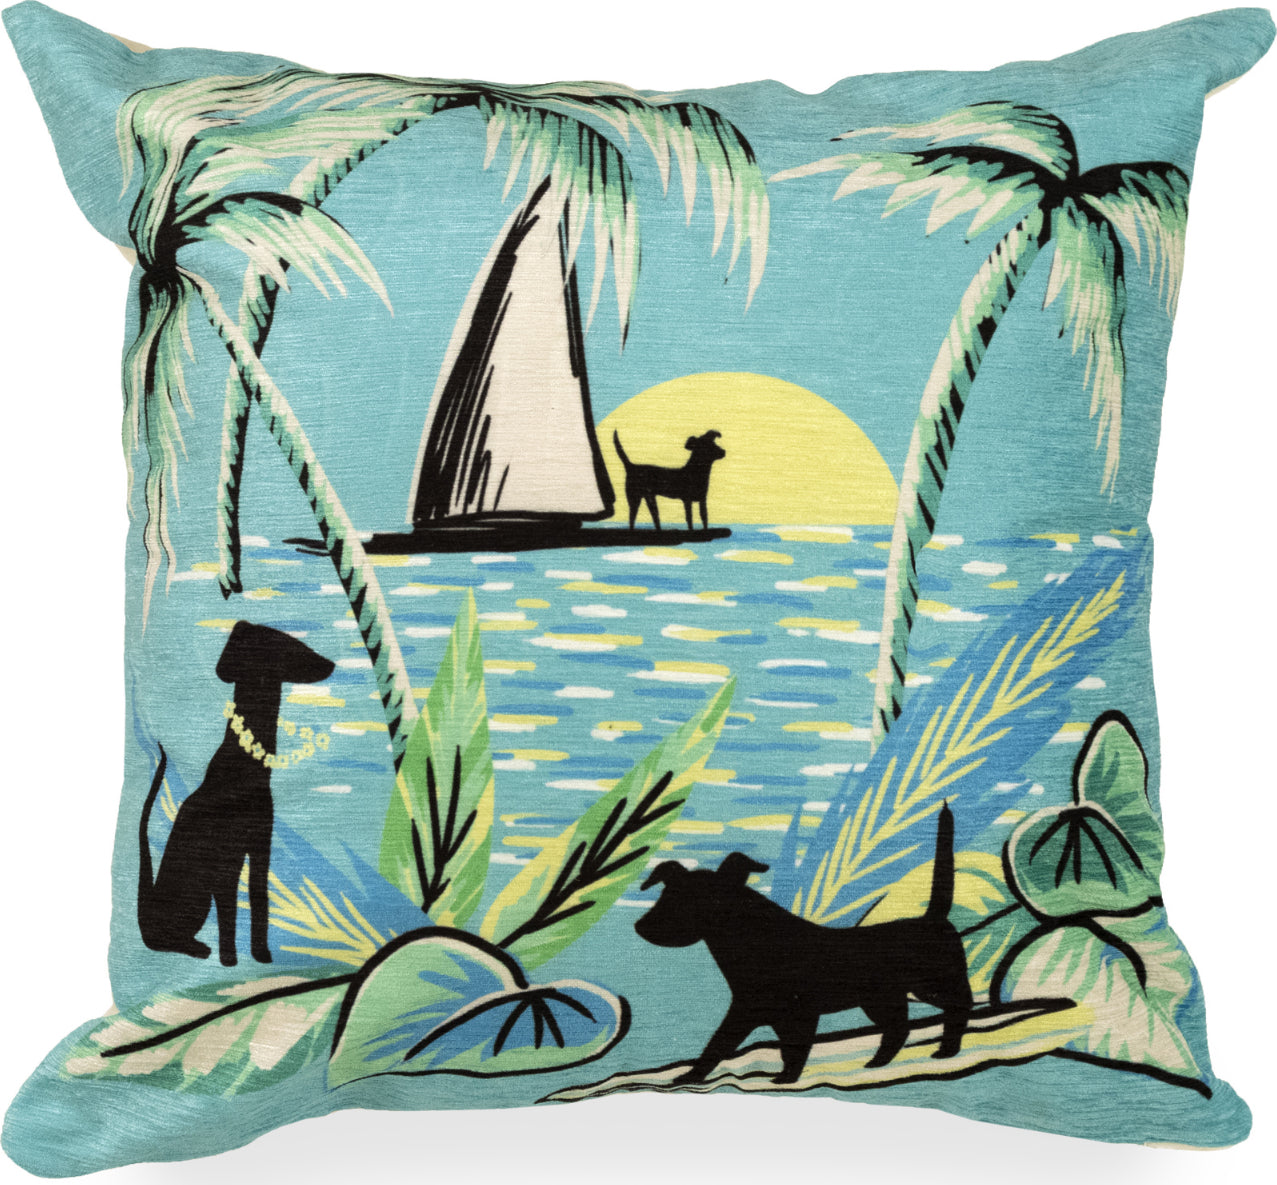 Trans Ocean Illusions 3299/17 Aloha Dogs Blue by Liora Manne